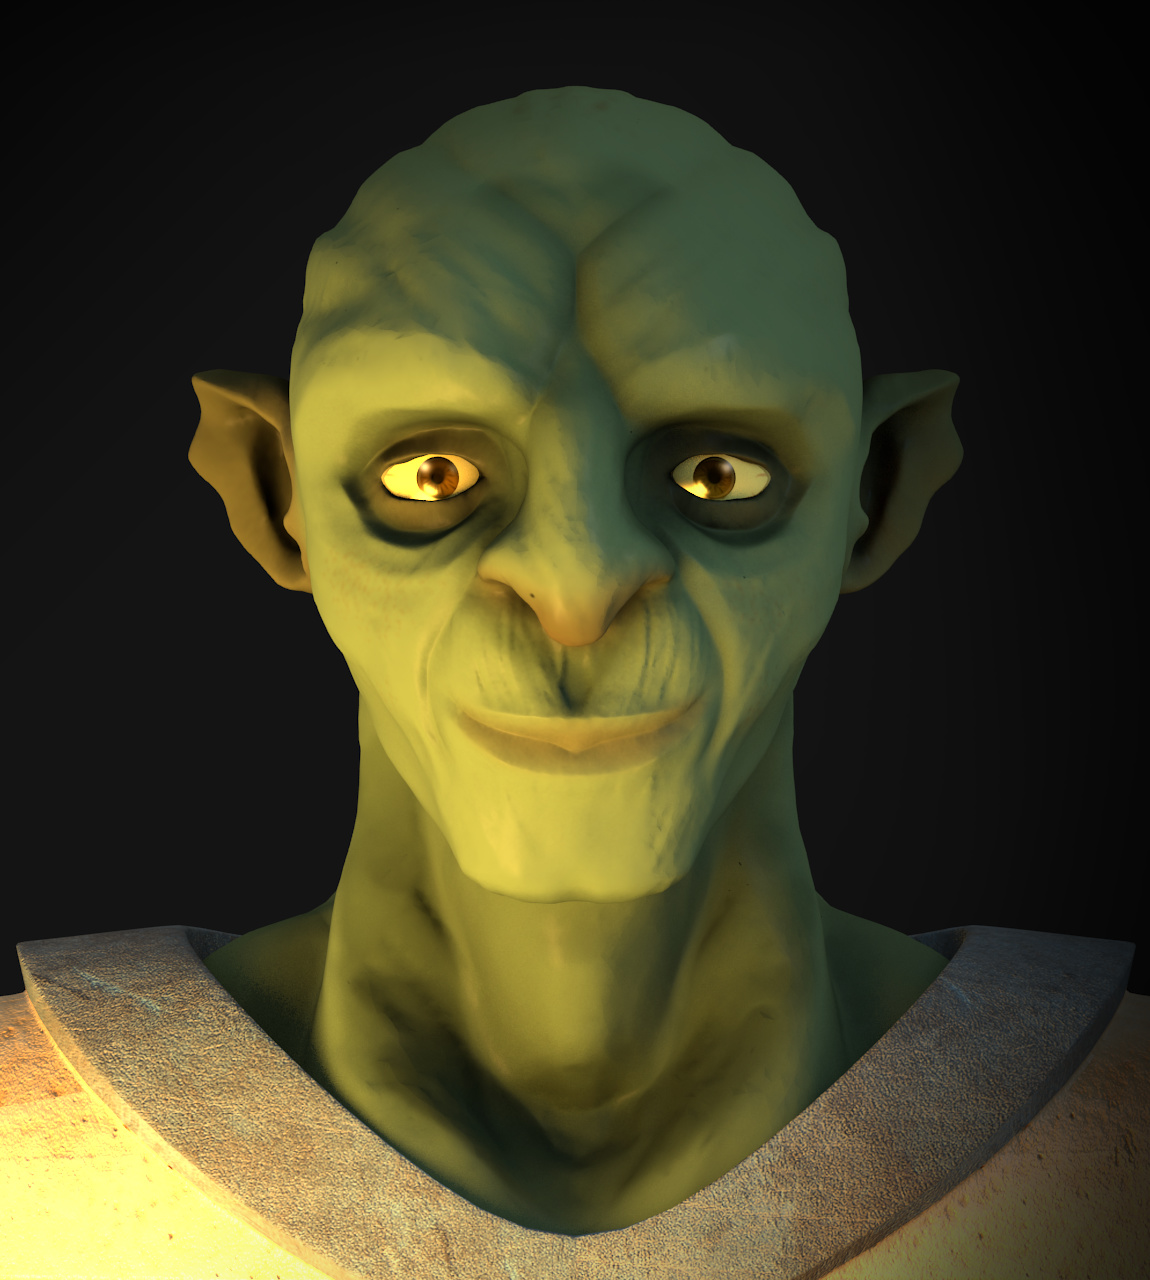 a good goblin - Finished Projects - Blender Artists Community